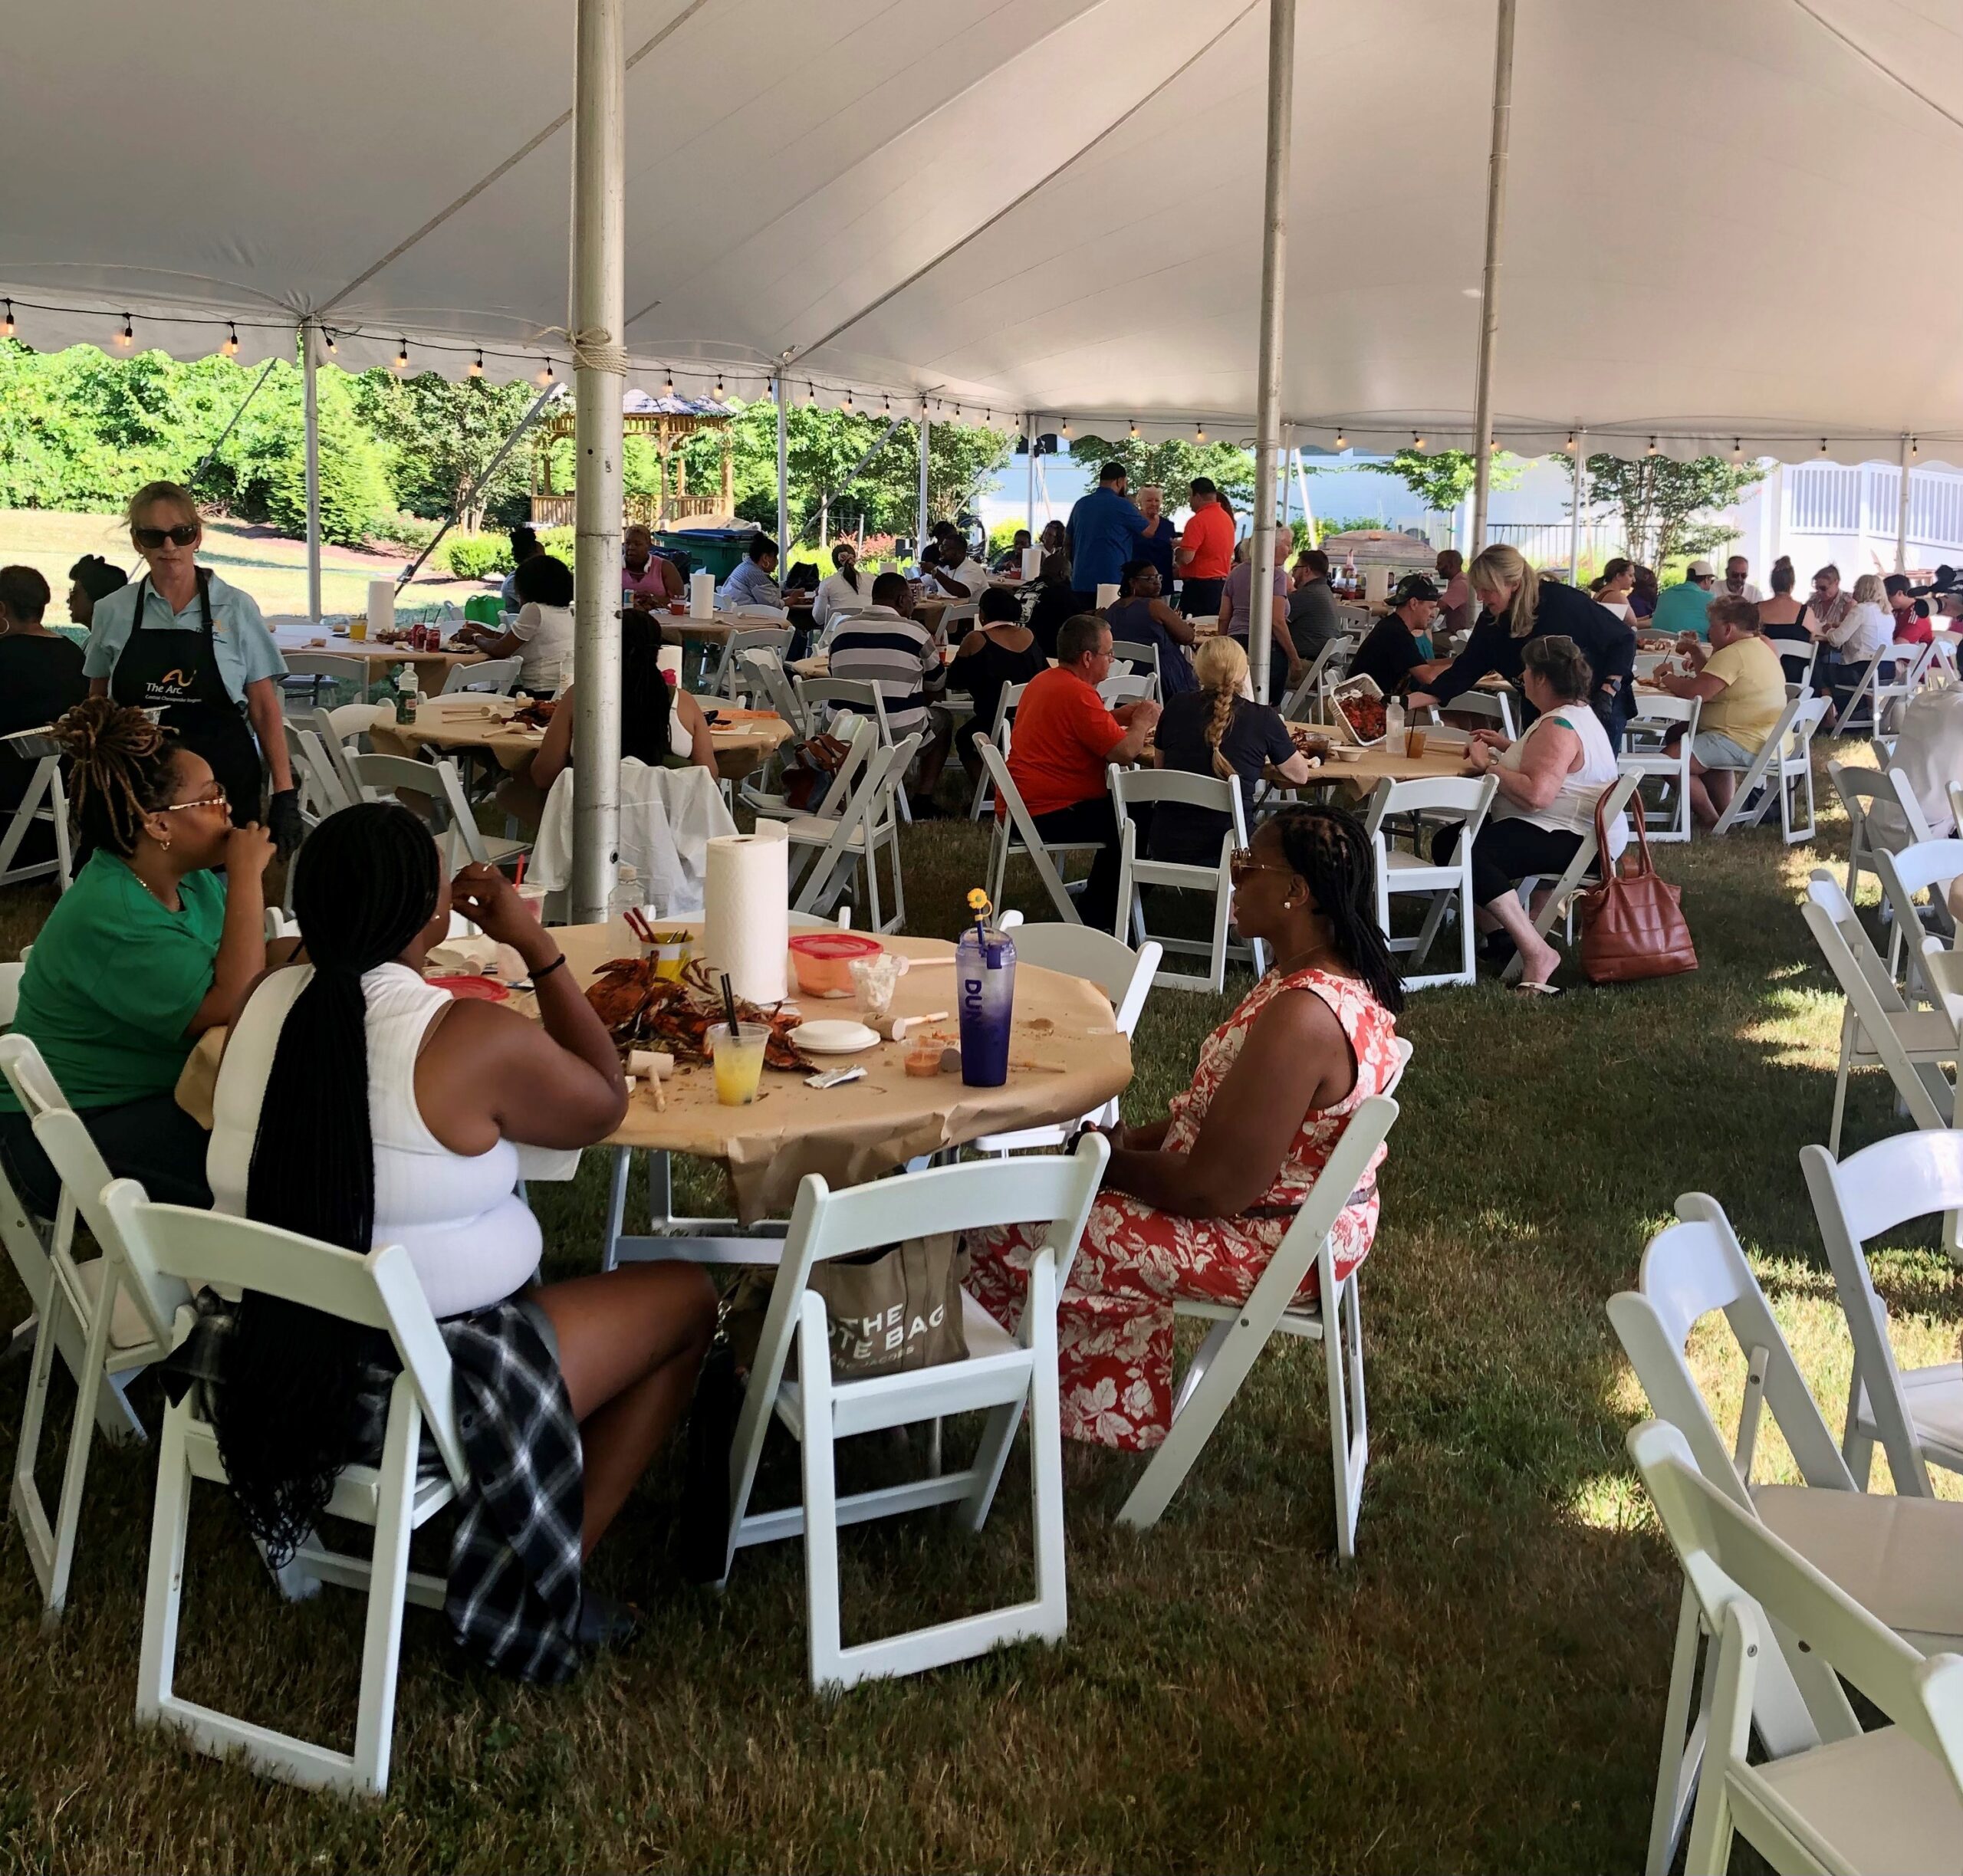 Employees of The Arc sitting at tables under a tent for Celebration Service